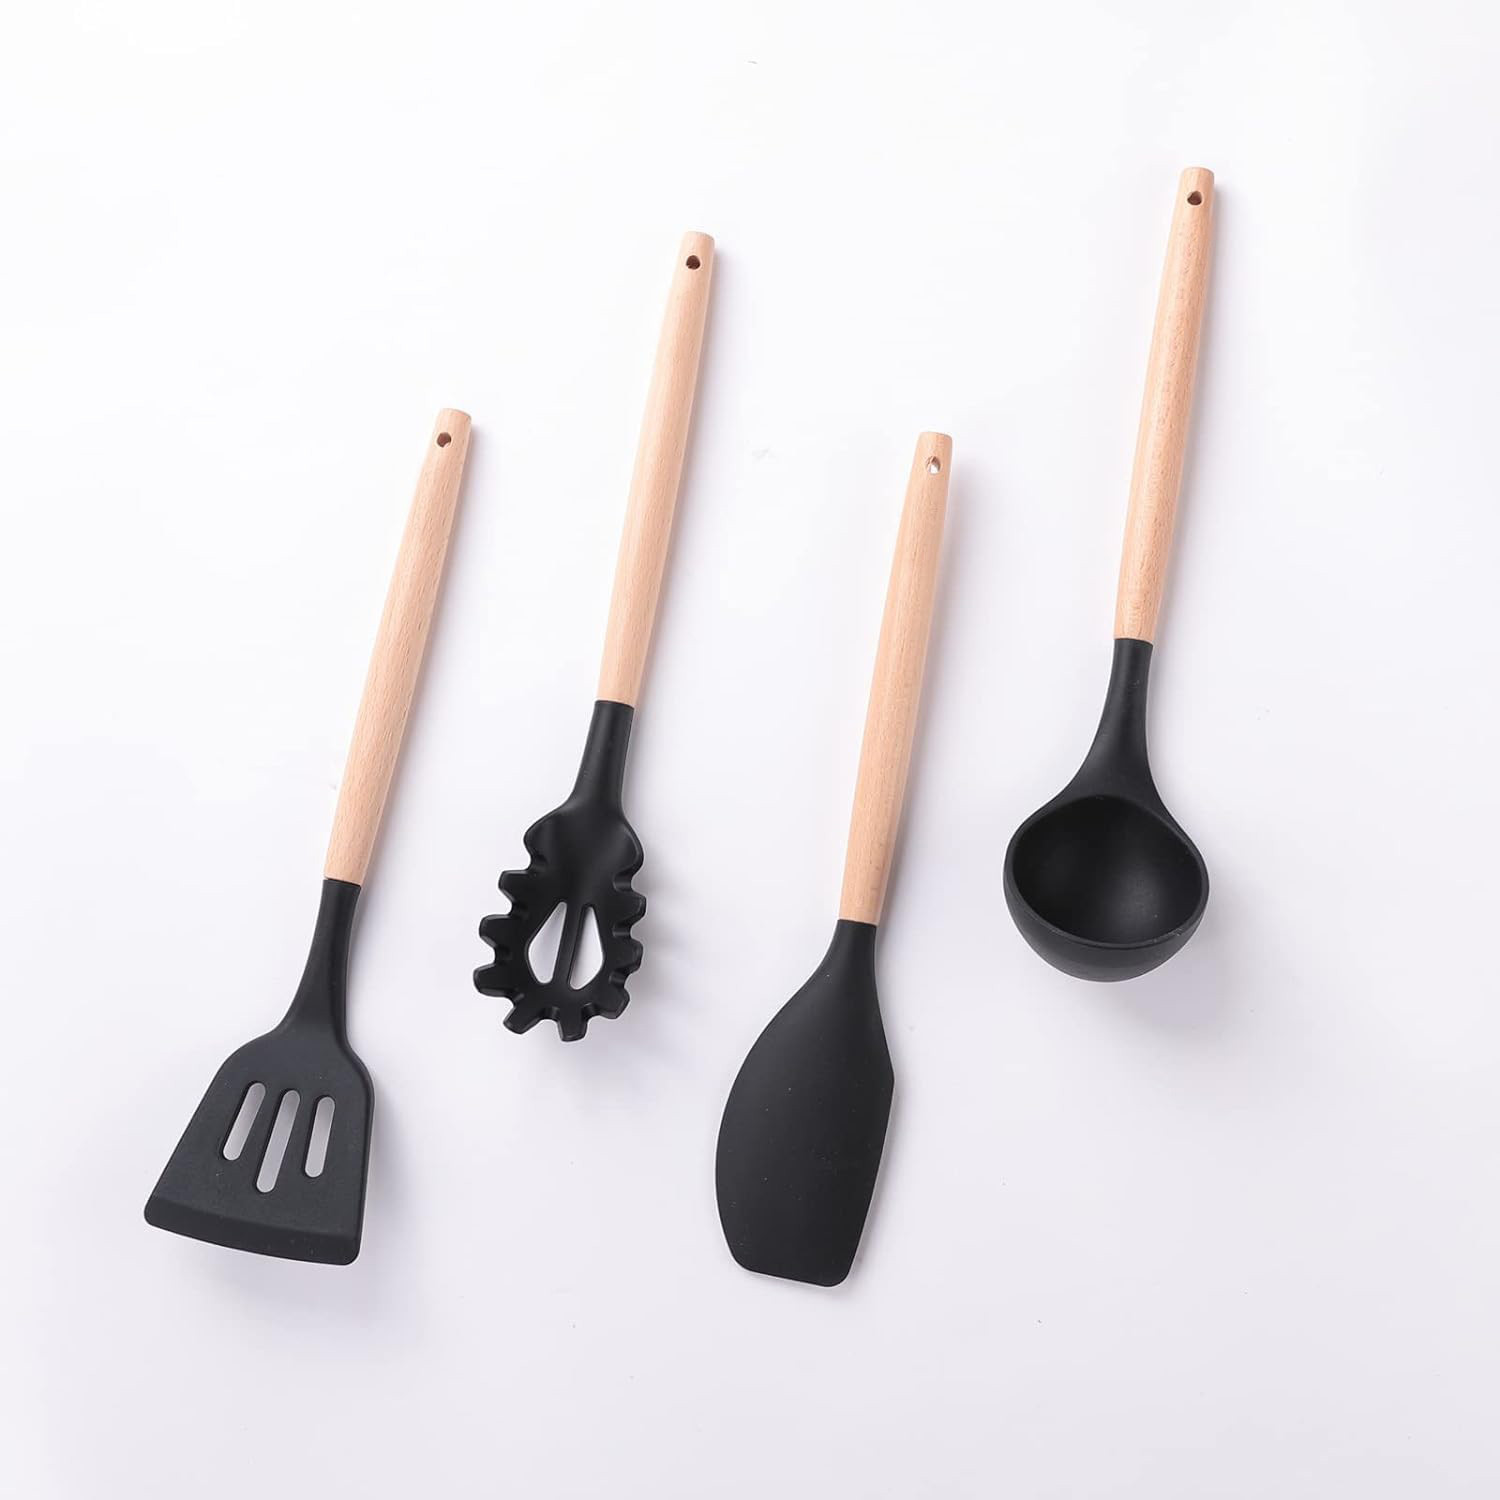 Kuber Industries Silicon Spatula Set | Flexible Kitchen Utensil Set | Spatula for Cooking | Non-Stick Spatula | Heat Resistant Spatula With Wooden Handle | DSSH001-2 | Set of 12 | Black